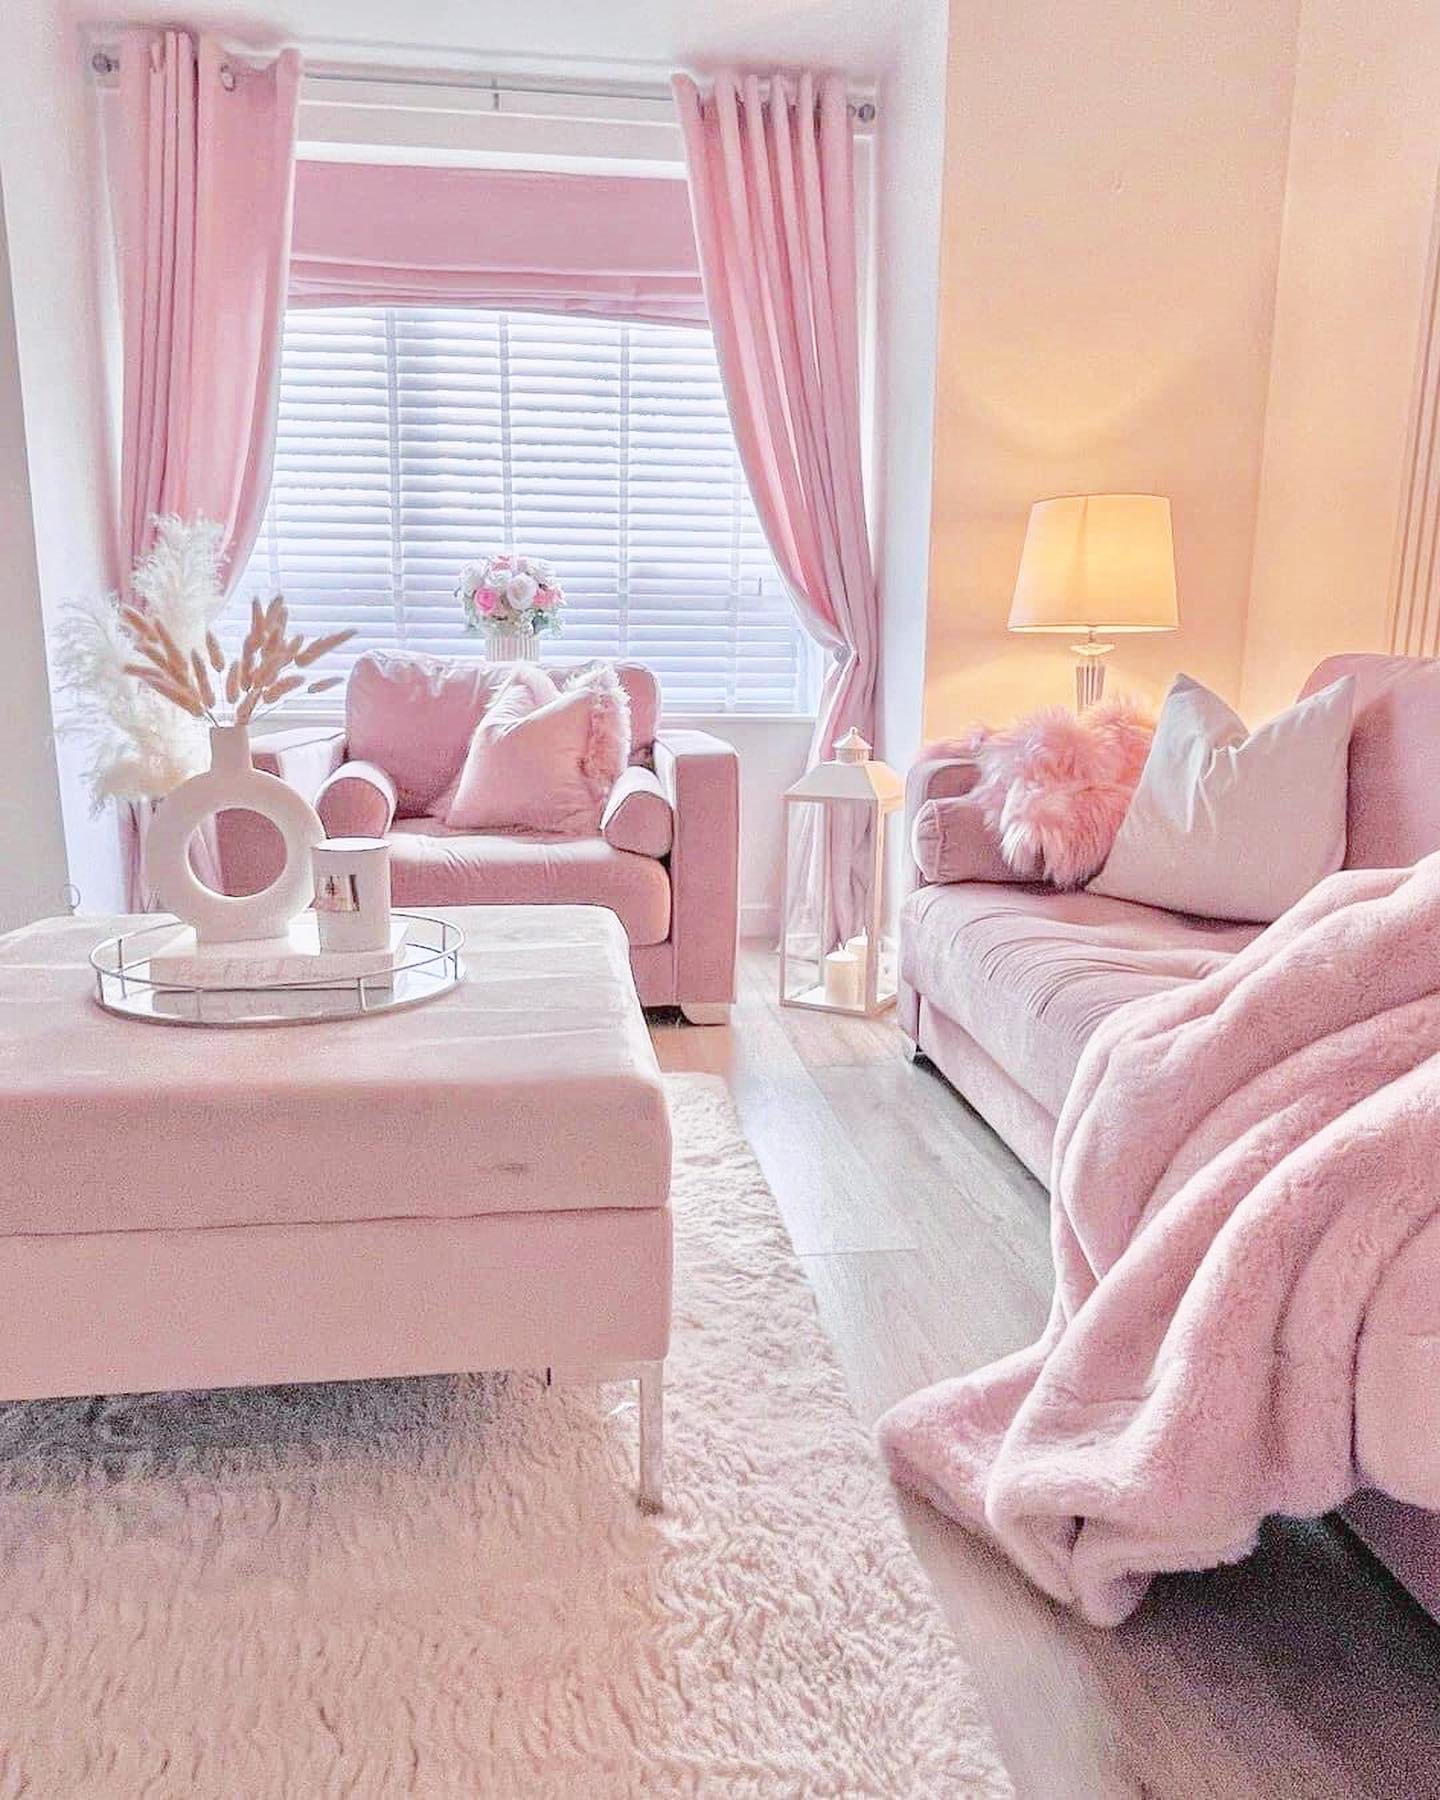 Dream home pink vibes! ₊✩‧₊˚౨ৎ˚₊✩‧₊ How pretty are these pics! I love all the PINK, don&rsquo;t you? 💕 

I just got an Amazon shop and I&rsquo;m going to be adding all the PINK and GIRLY finds I love!! You can check it out right now but check back a